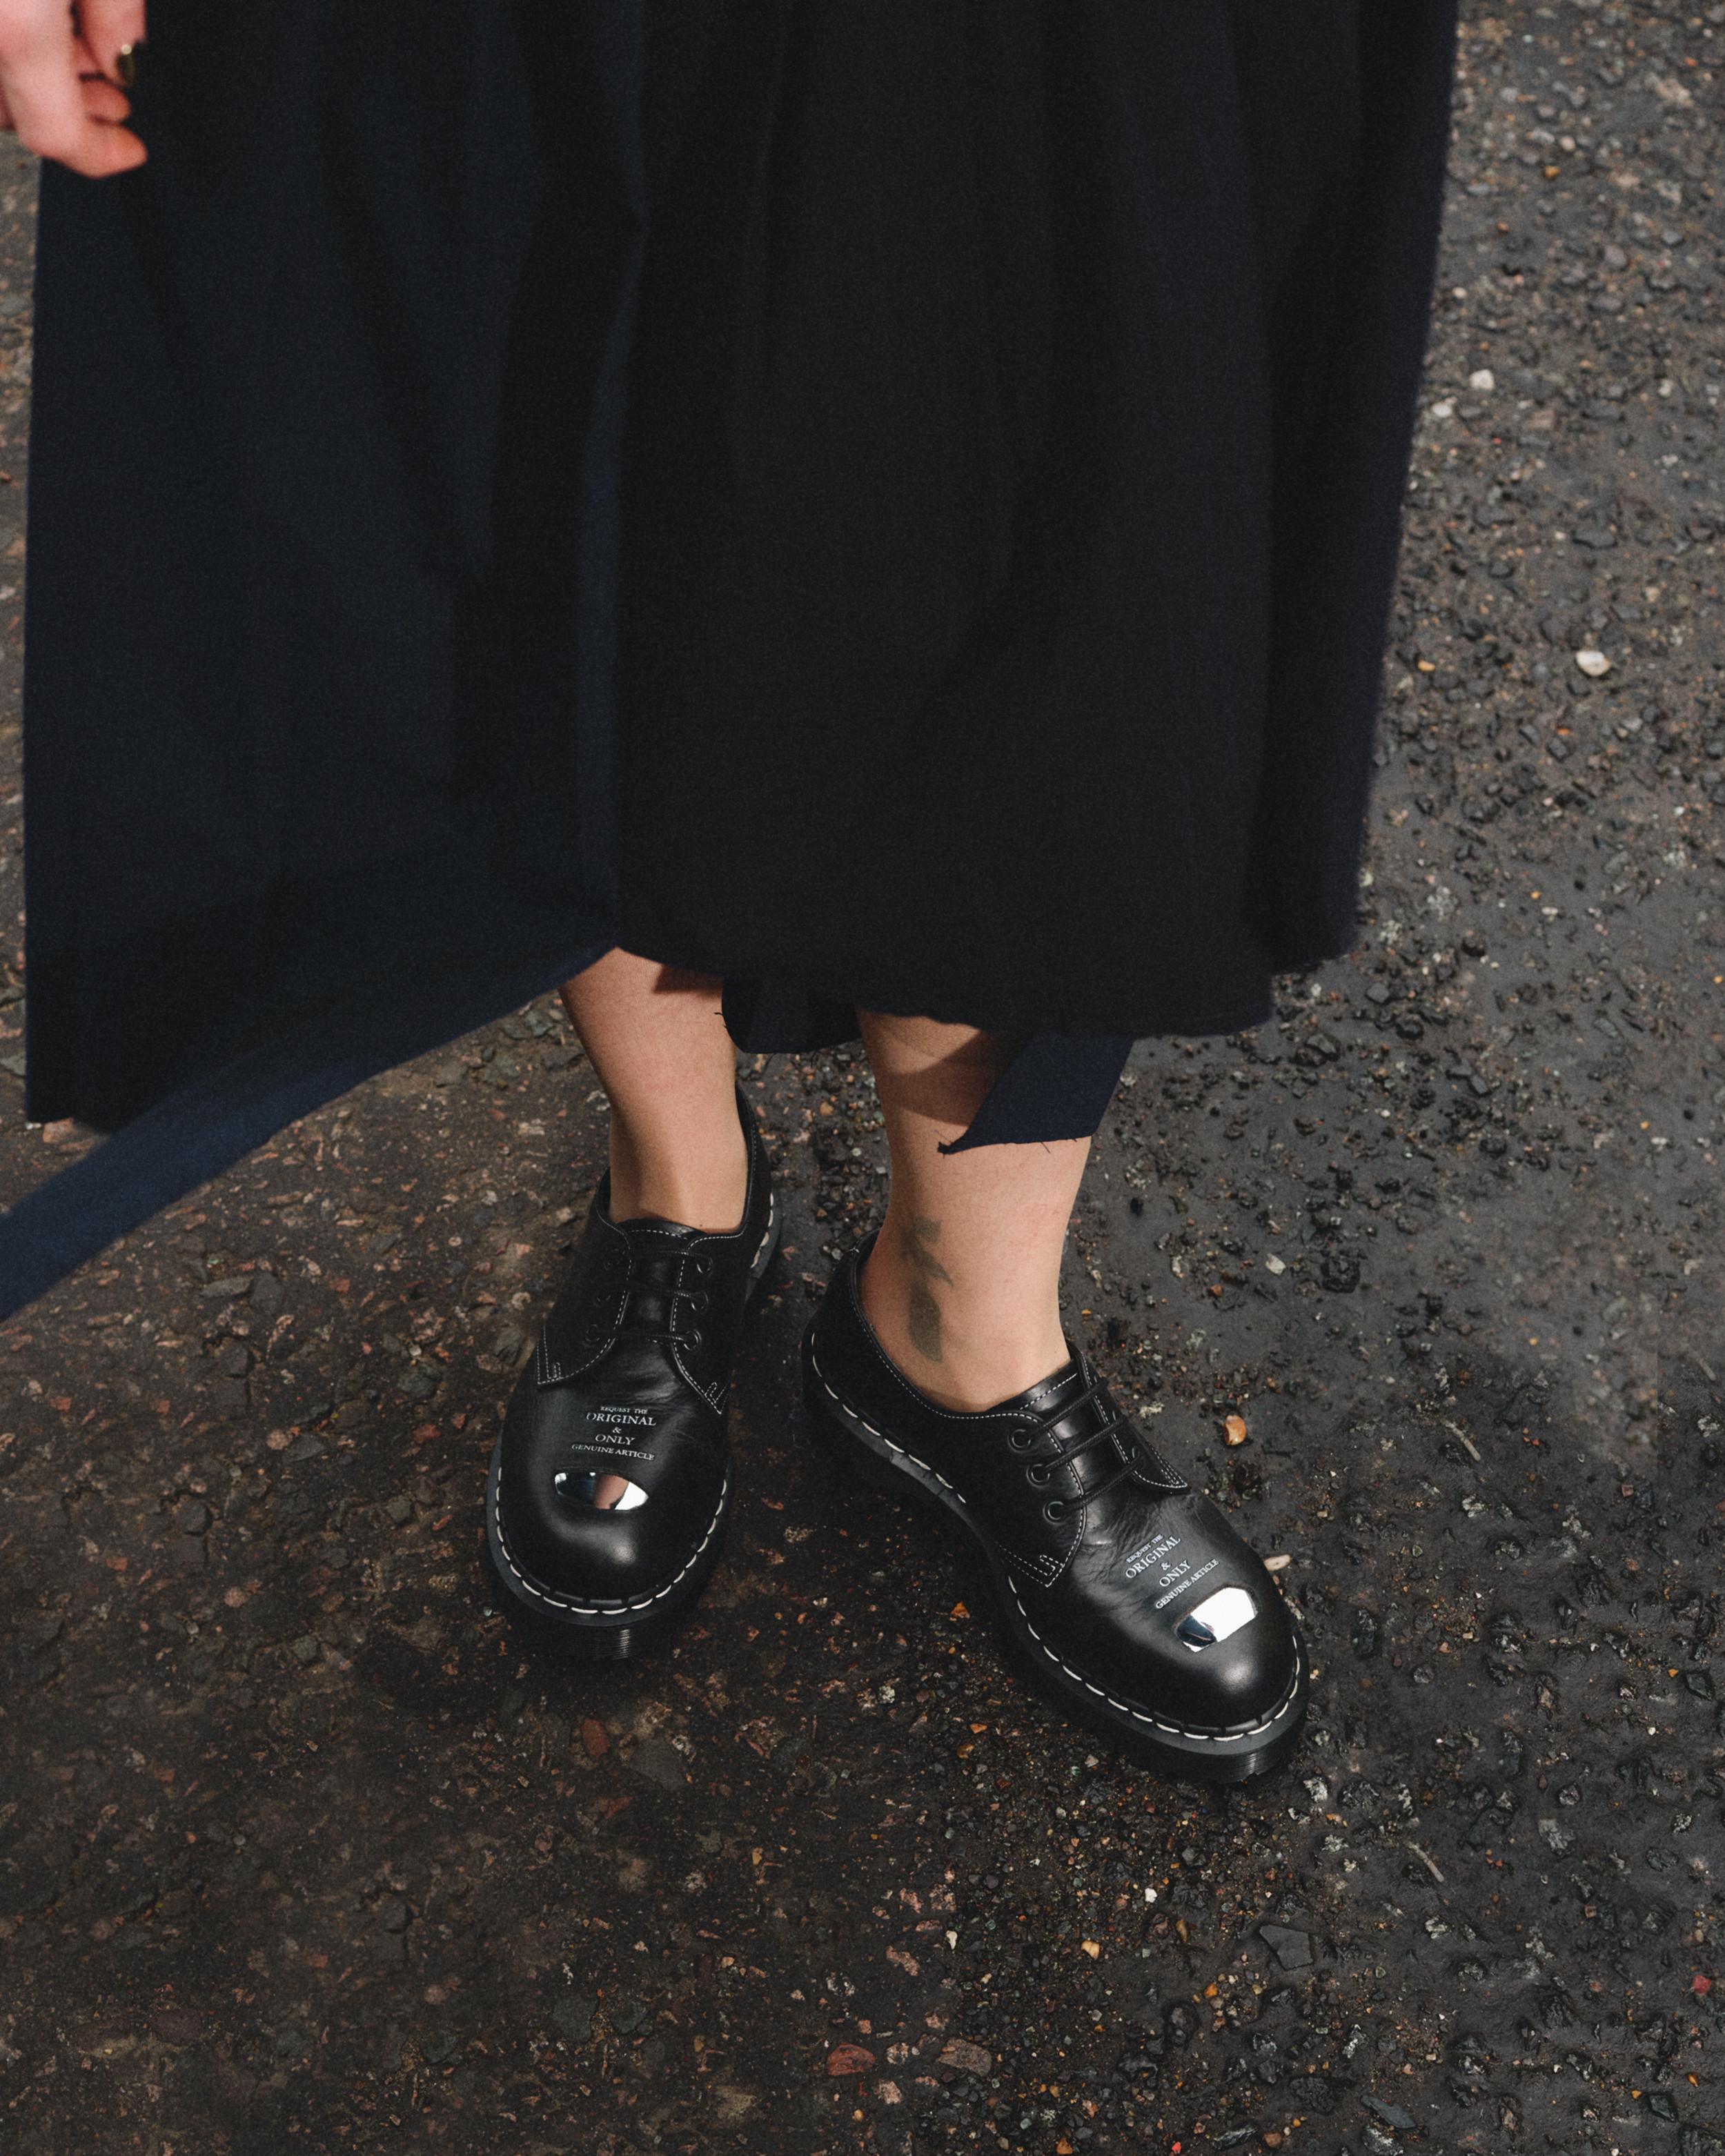 1461 Bex Exposed Steel Toe Oxford Shoes in Black | Dr. Martens